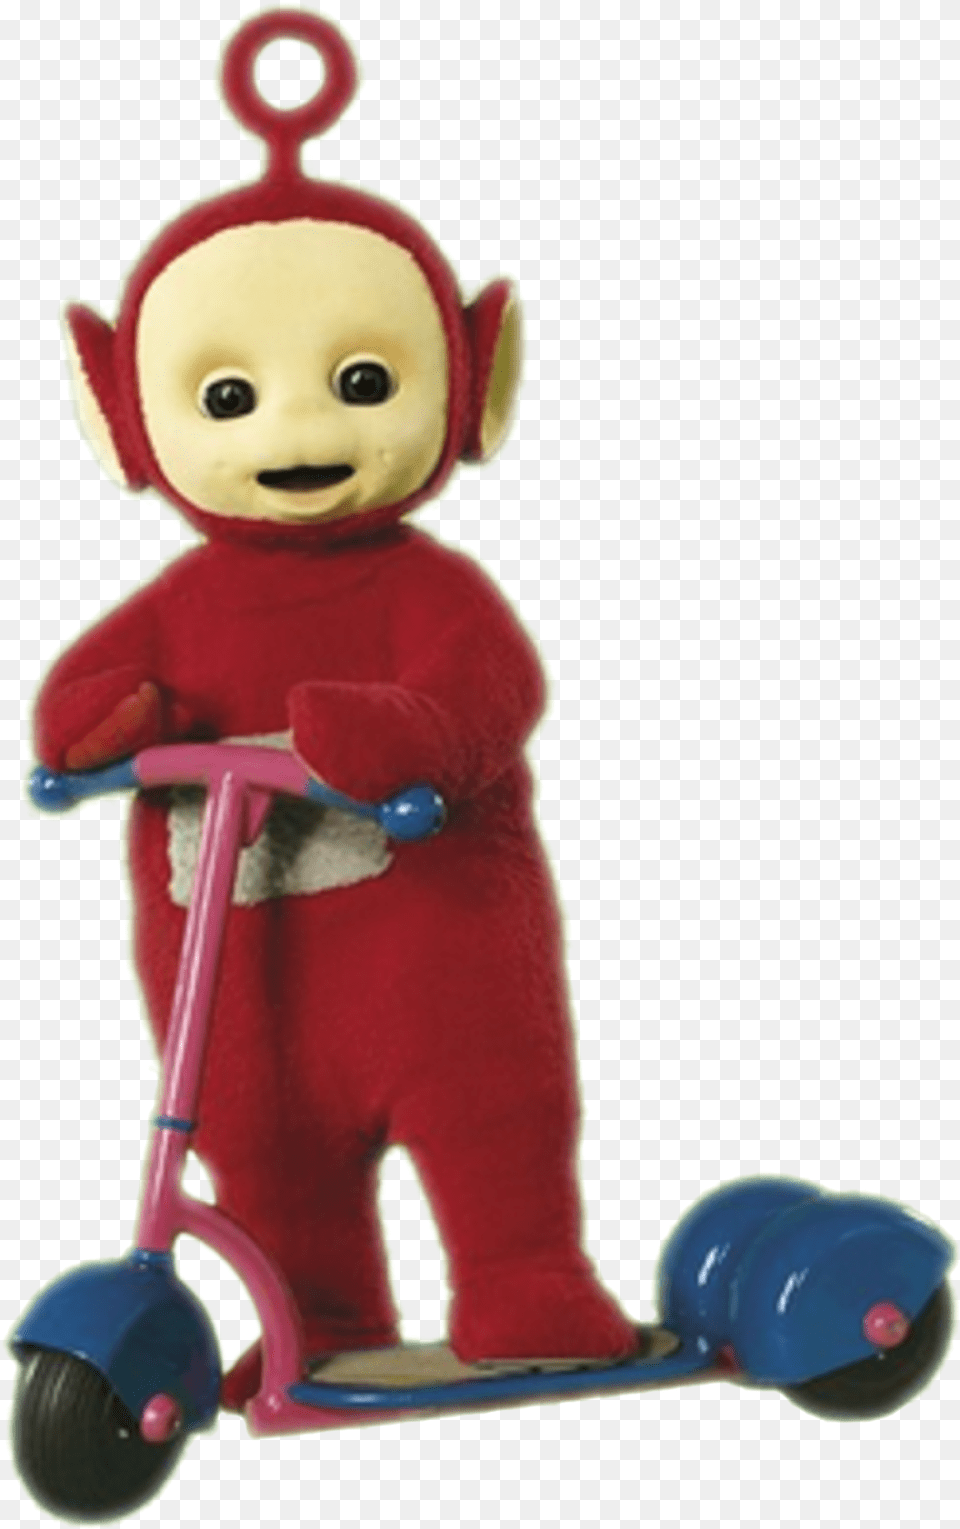 Teletubbies Po S Scooter2 Teletubbies Po Scooter Toys, Transportation, Vehicle, Toy, Face Free Png Download